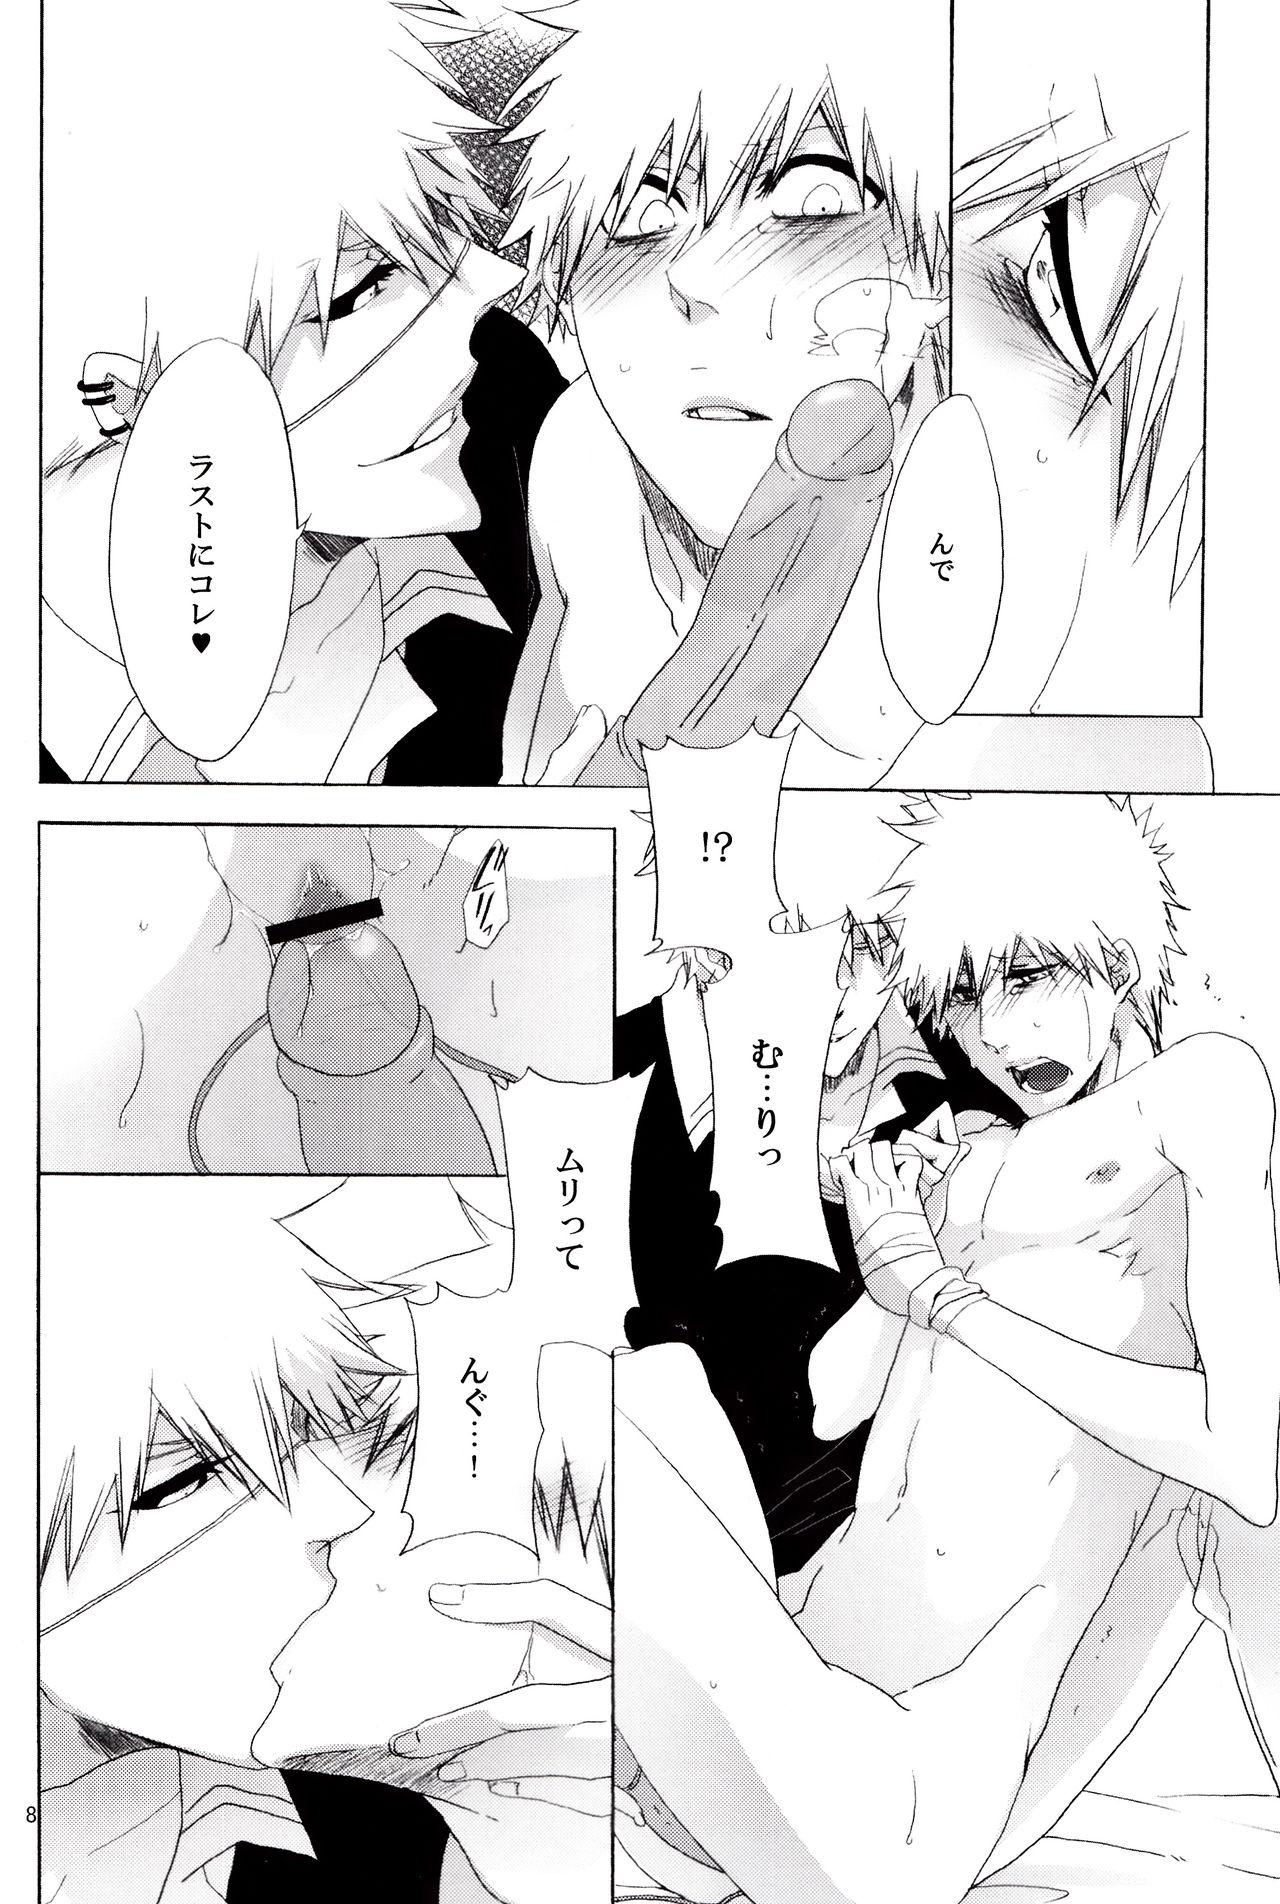 Blowing Trust Me - Bleach Famosa - Page 9